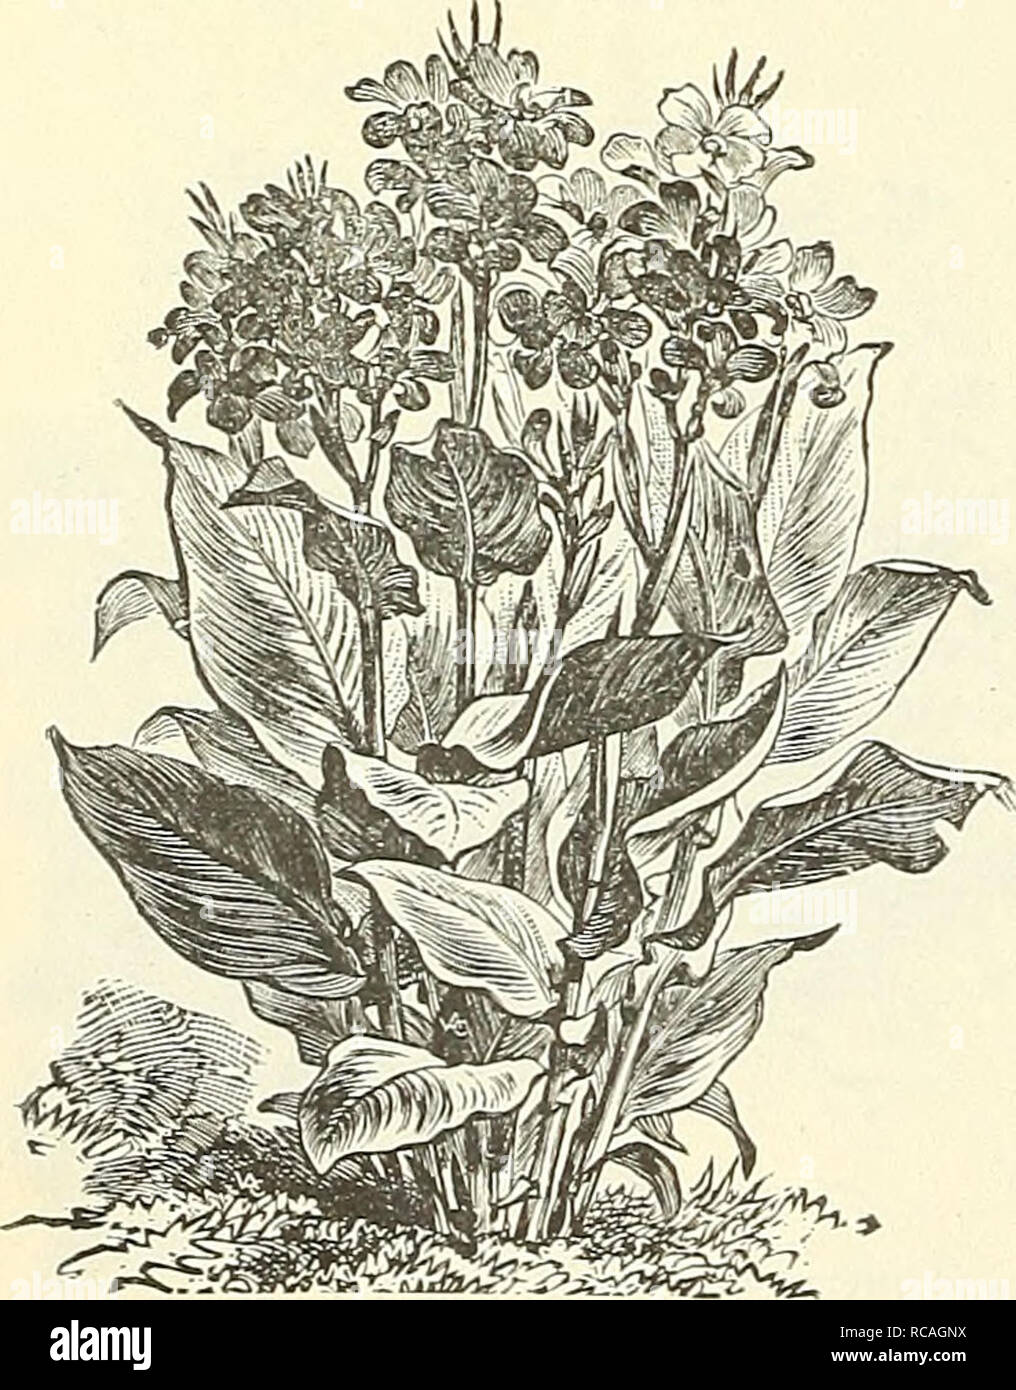 . Dreer's garden book : 1904. Seeds Catalogs; Nursery stock Catalogs; Gardening Equipment and supplies Catalogs; Flowers Seeds Catalogs; Vegetables Seeds Catalogs; Fruit Seeds Catalogs. Campanula Persicifolia Grandiflora.. Cup and Saucer Canterbury Bells. Hardy Perennial Candytufts. (Iberis. I PER PKT. 1771 Qibraltarlca Hy= brida. Very fine species, white flowers, shading to lilac 10 1772 Sempervirens. A profuse w late bloom- ing haidy perennial, coming in flower early in the spring; much used lor cemeteries, rockeries, etc.; 1 foot . 10 Canary-Bird Tine. (Tropseoluiu Canariense.) 1741 A beaut Stock Photo